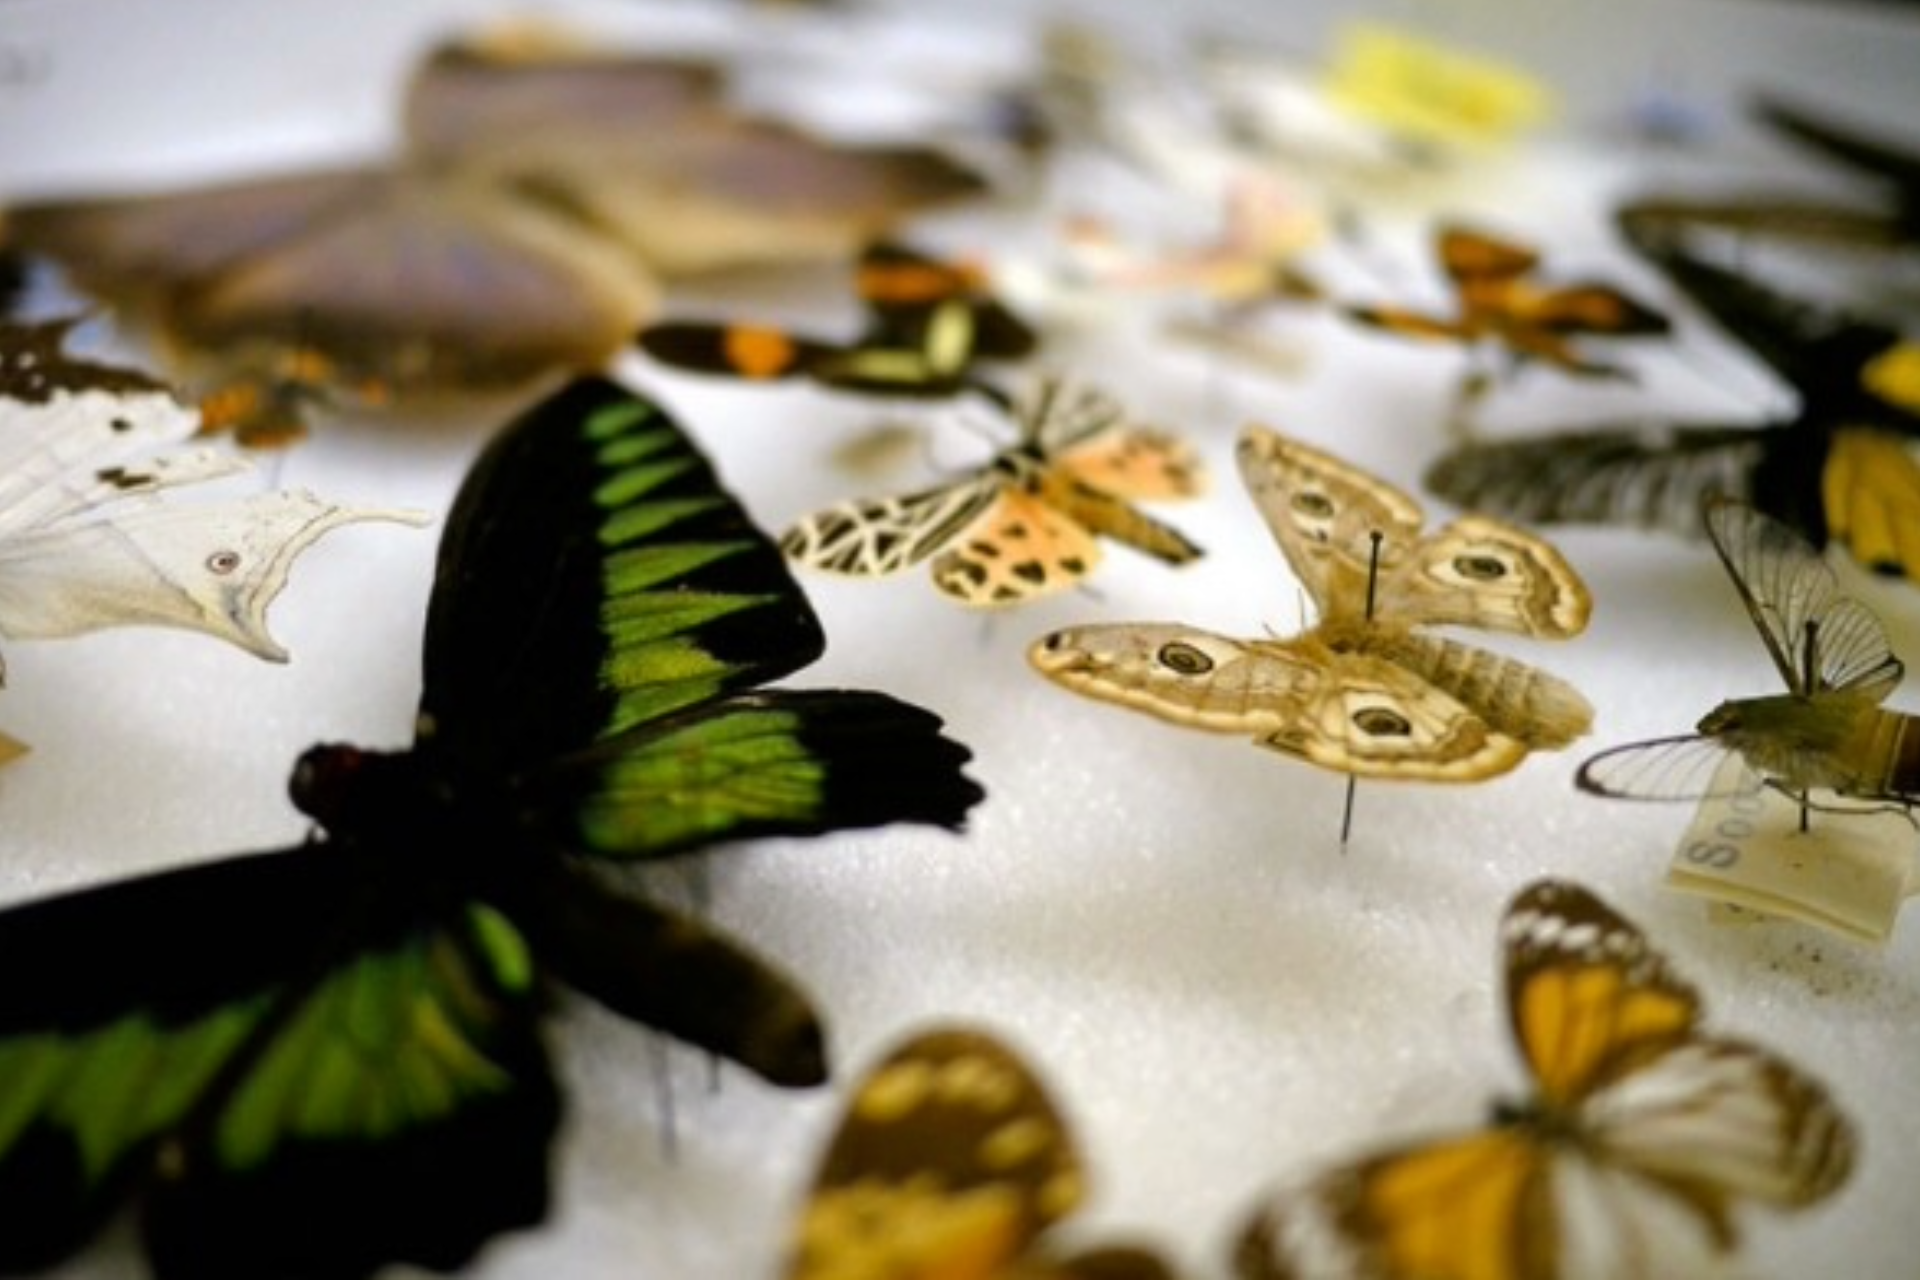 During Action for Earth at the Science Museum of Minnesota, visitors can learn how to preserve their own diverse specimens like insects, moths, and butterflies, from experts in the Center for Research and Collections.